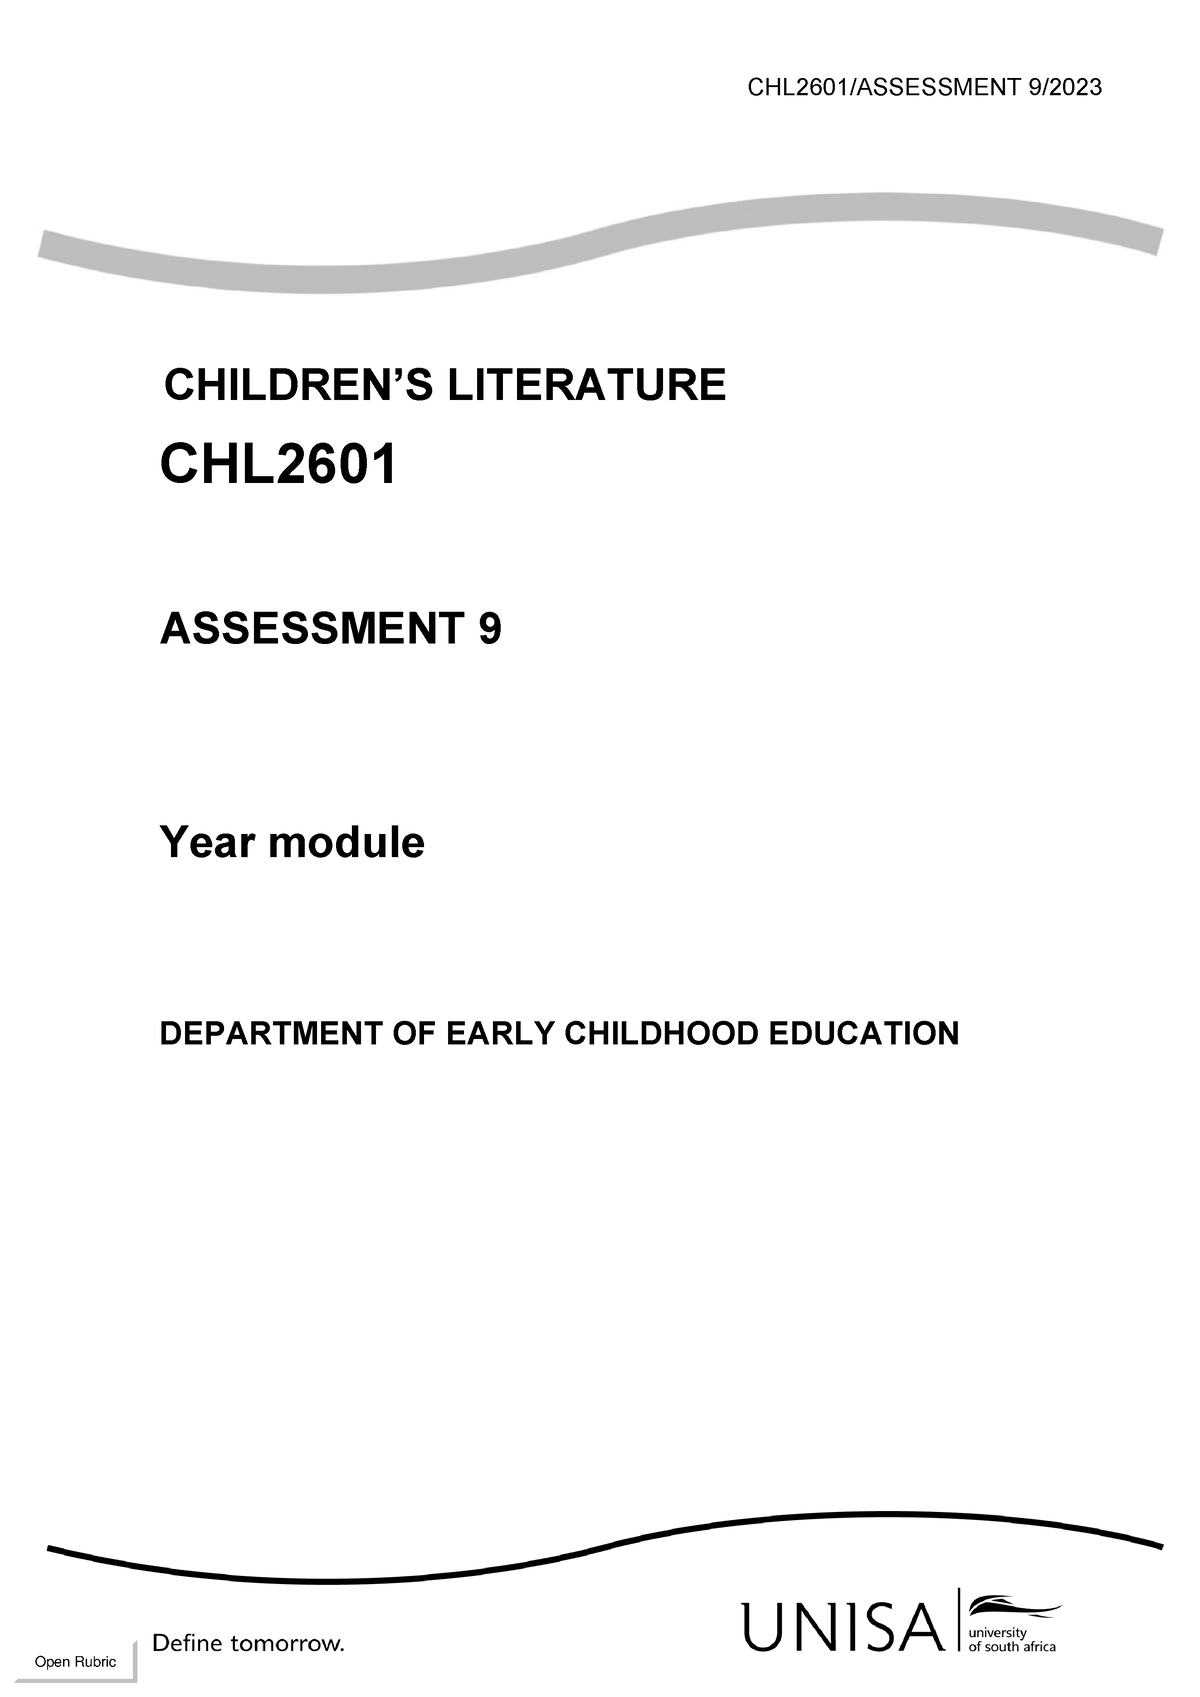 chl2601 assignment 9 2023